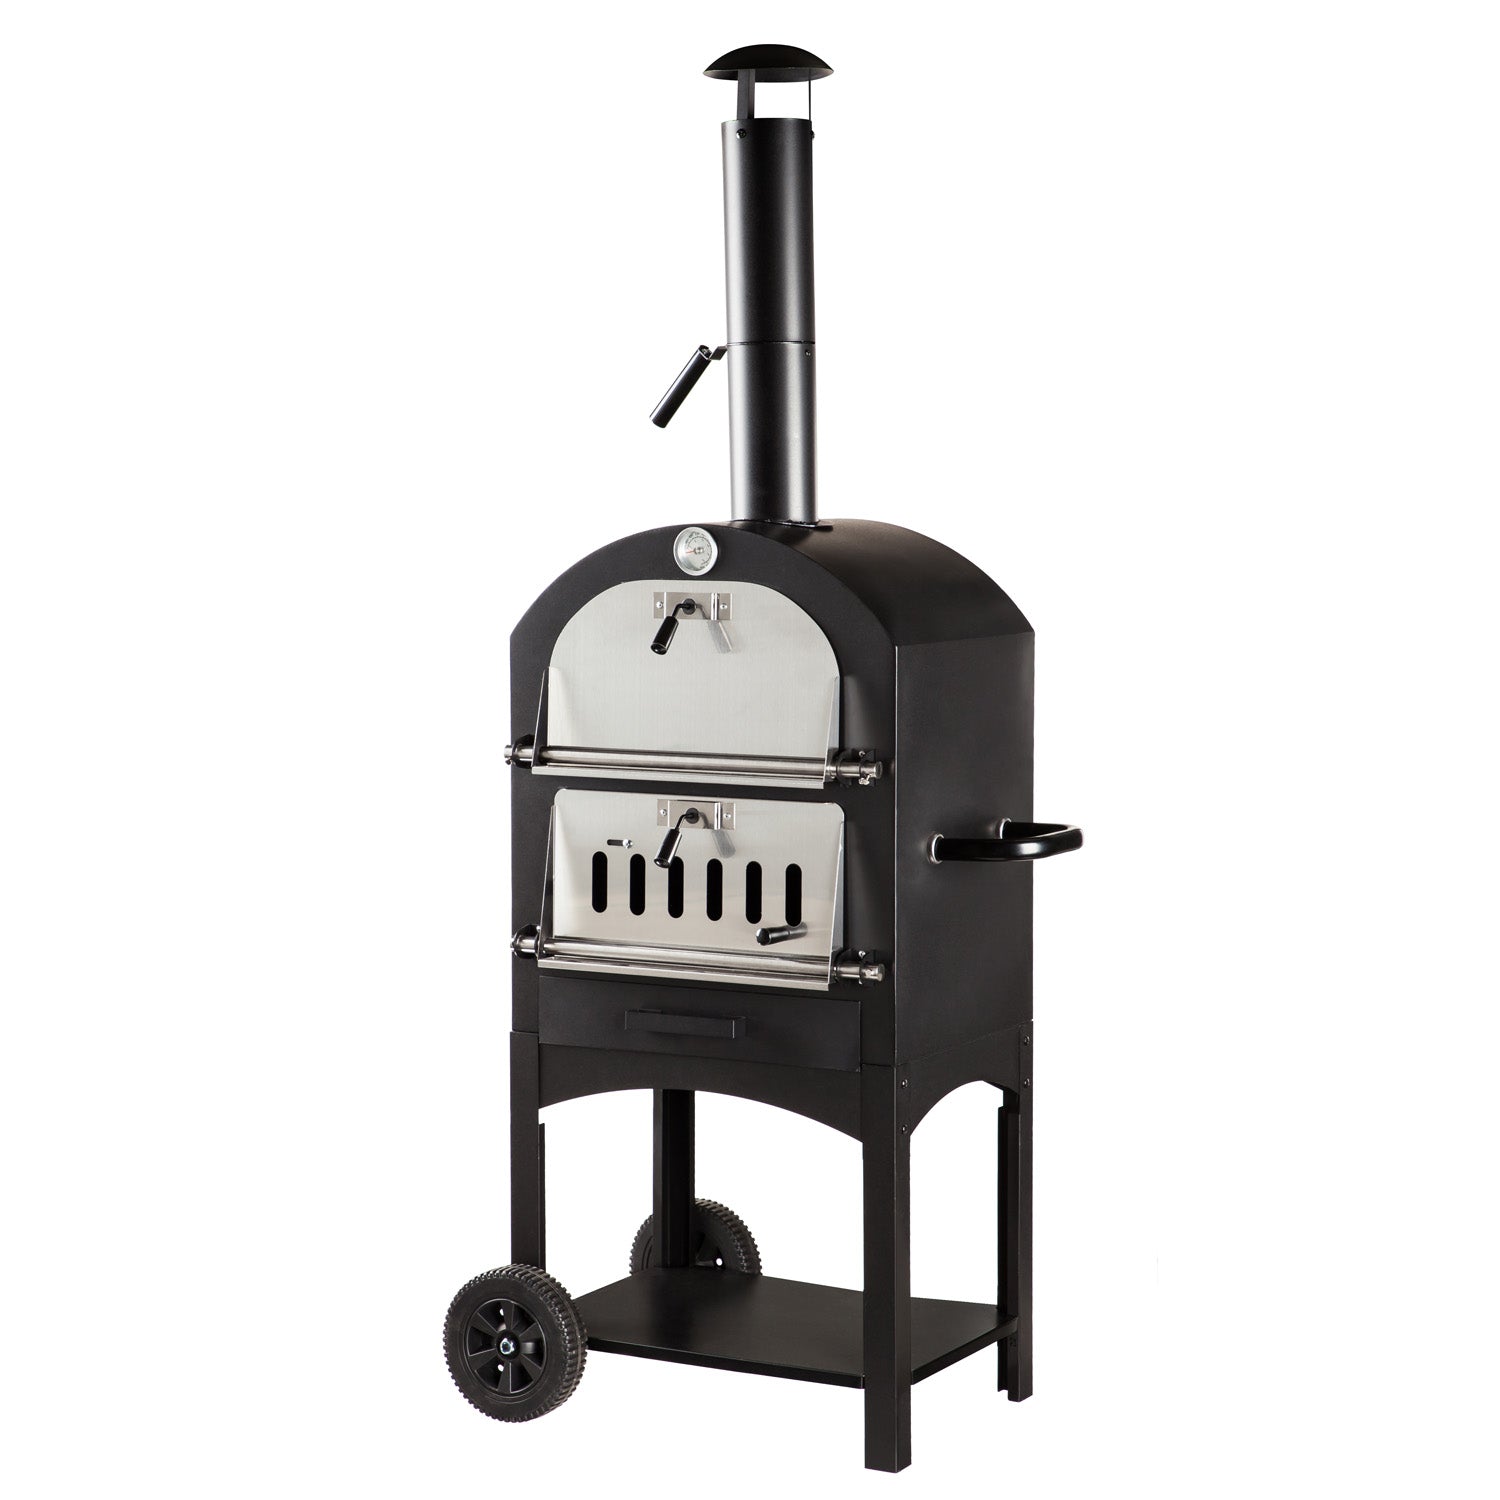 Plow & Hearth Charcoal Grill/Oven